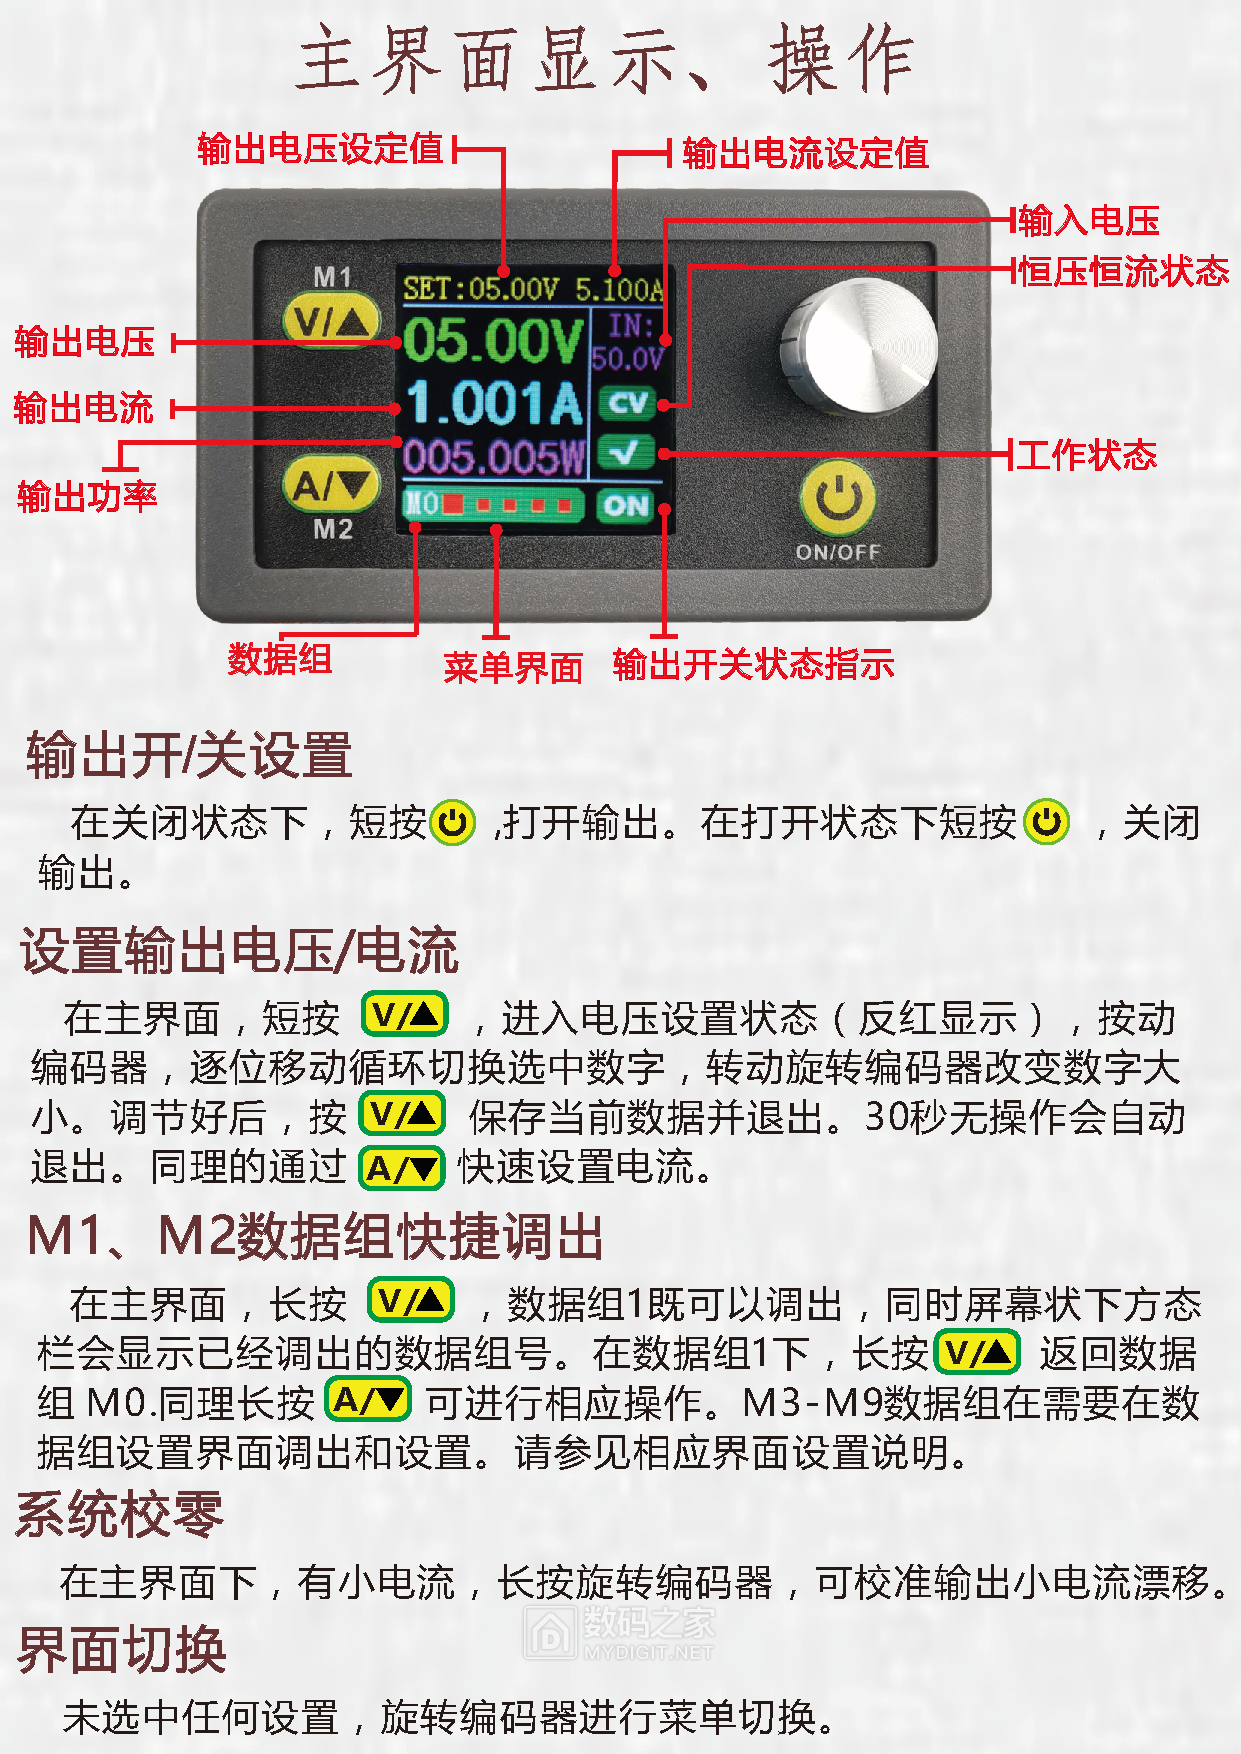 WZ5005E中文说明书_页面_07.png